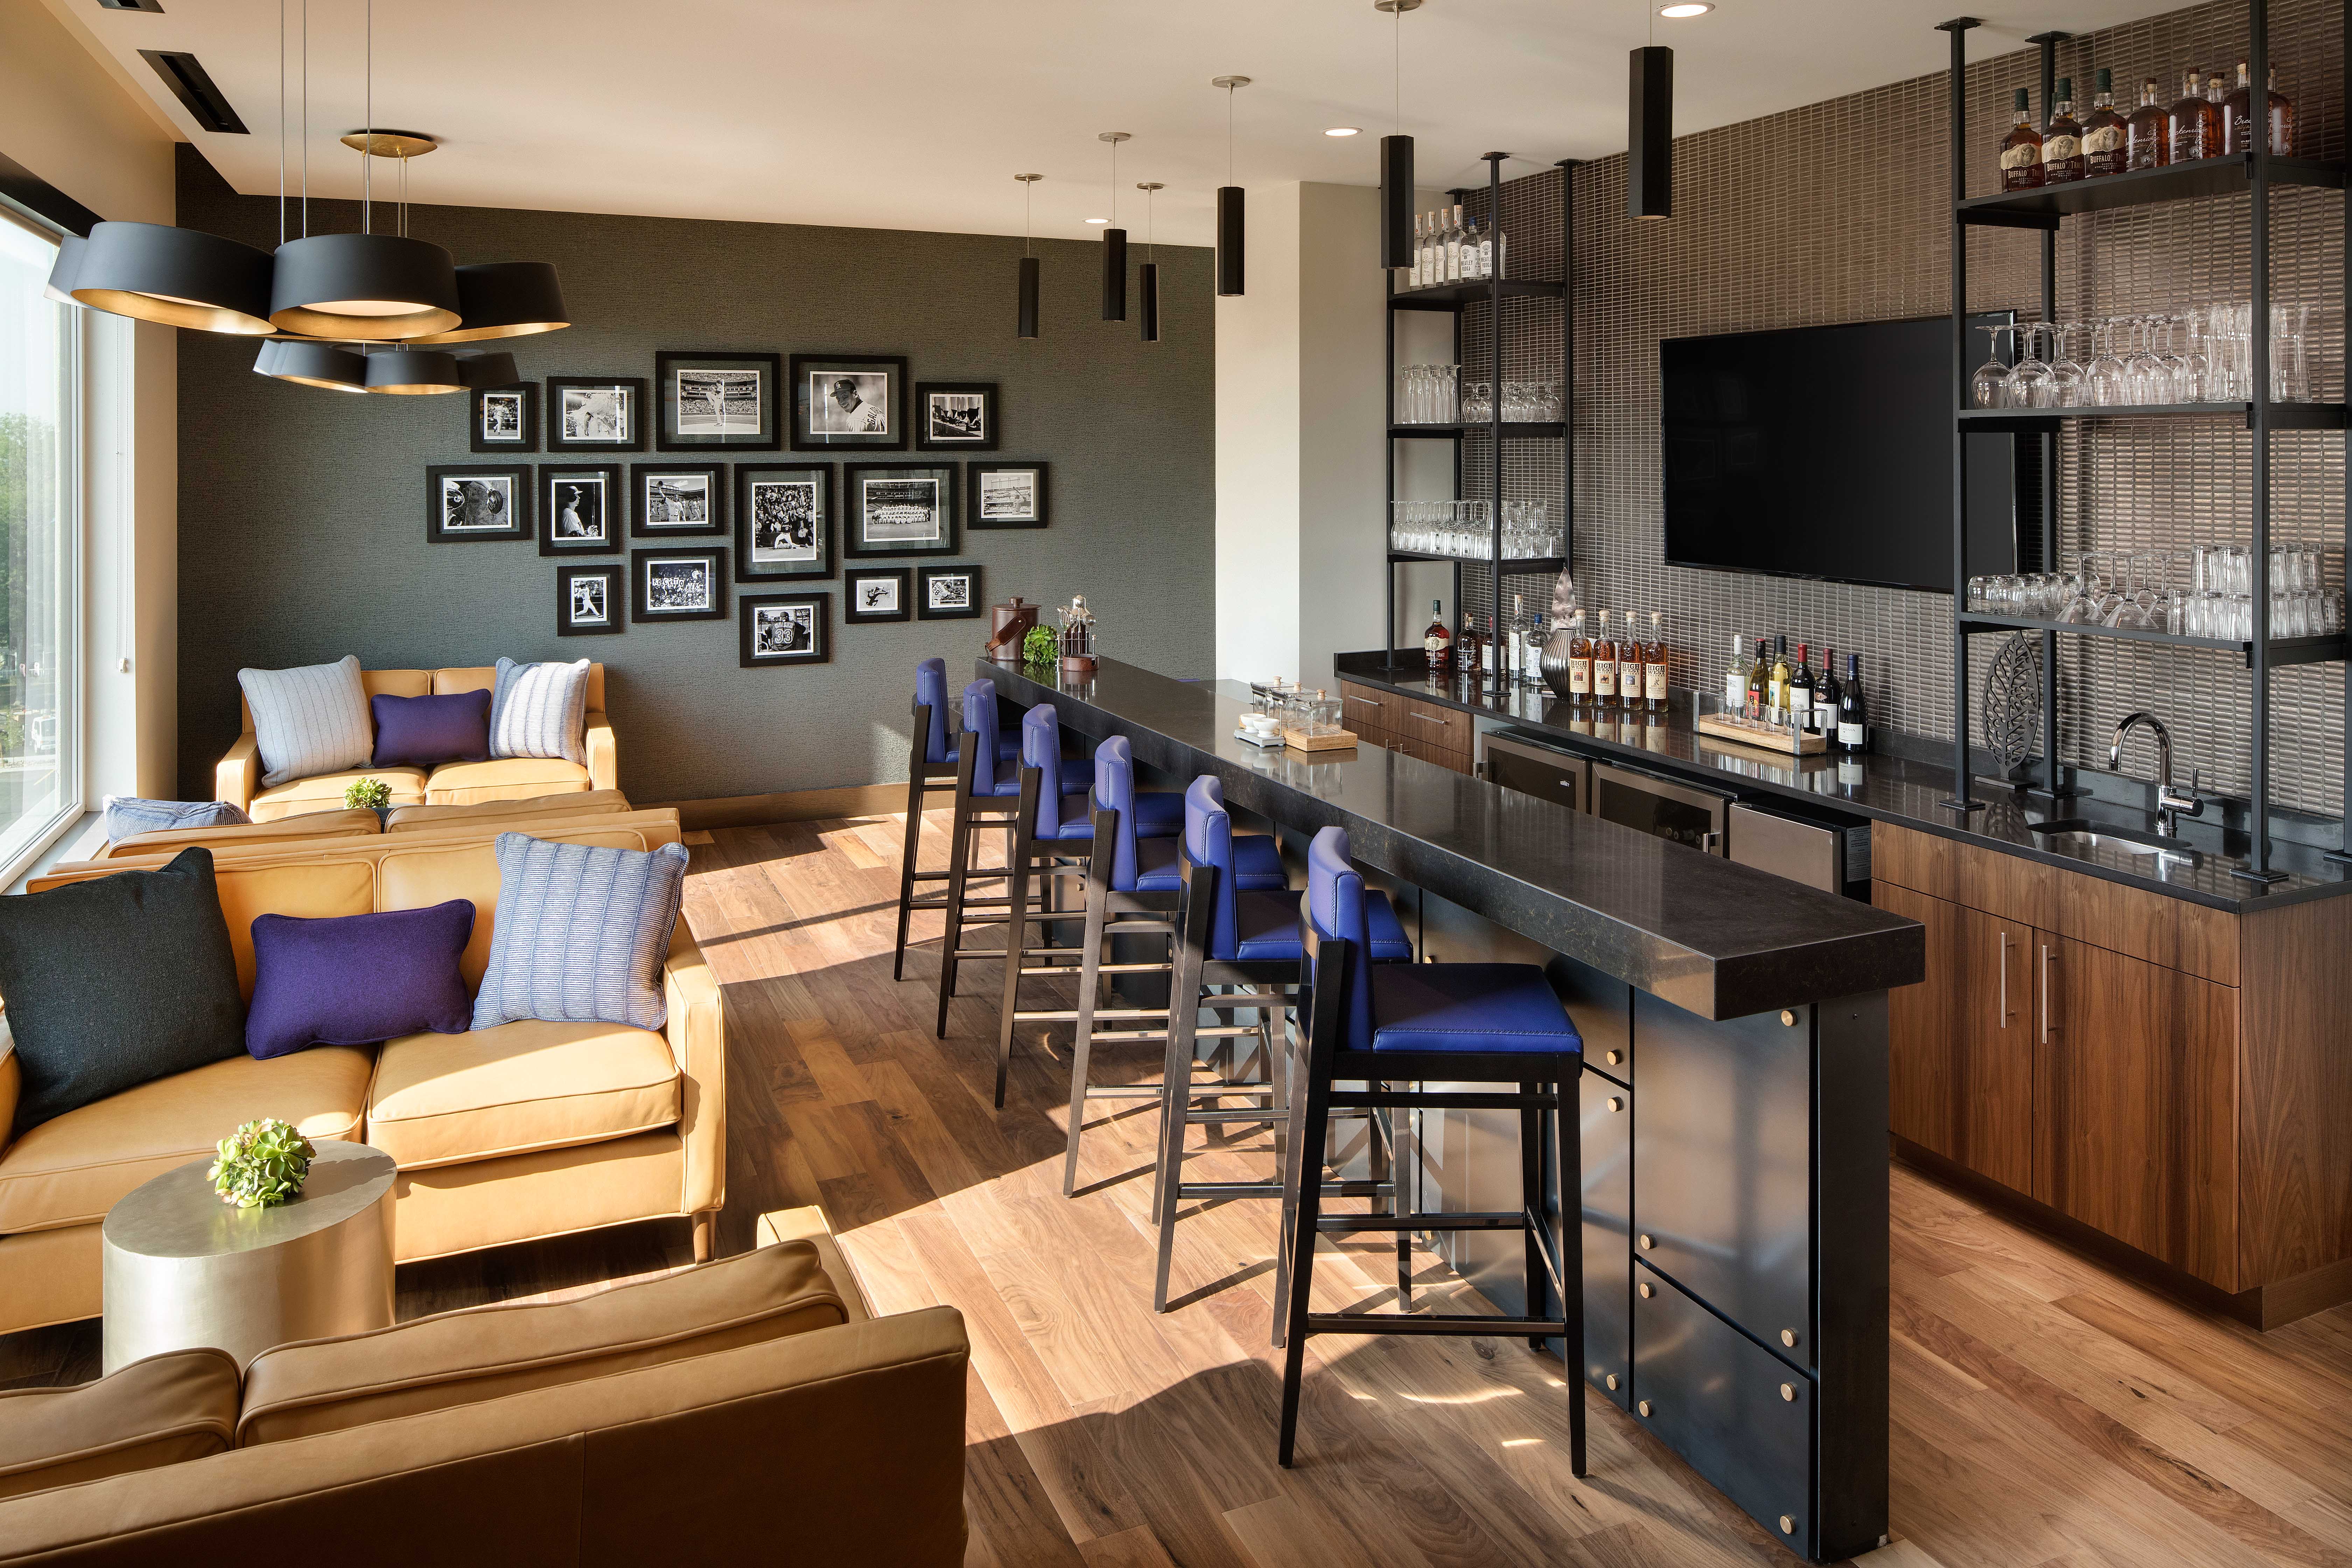 Rockies Retreat Bar with Mixed Seating and Windows